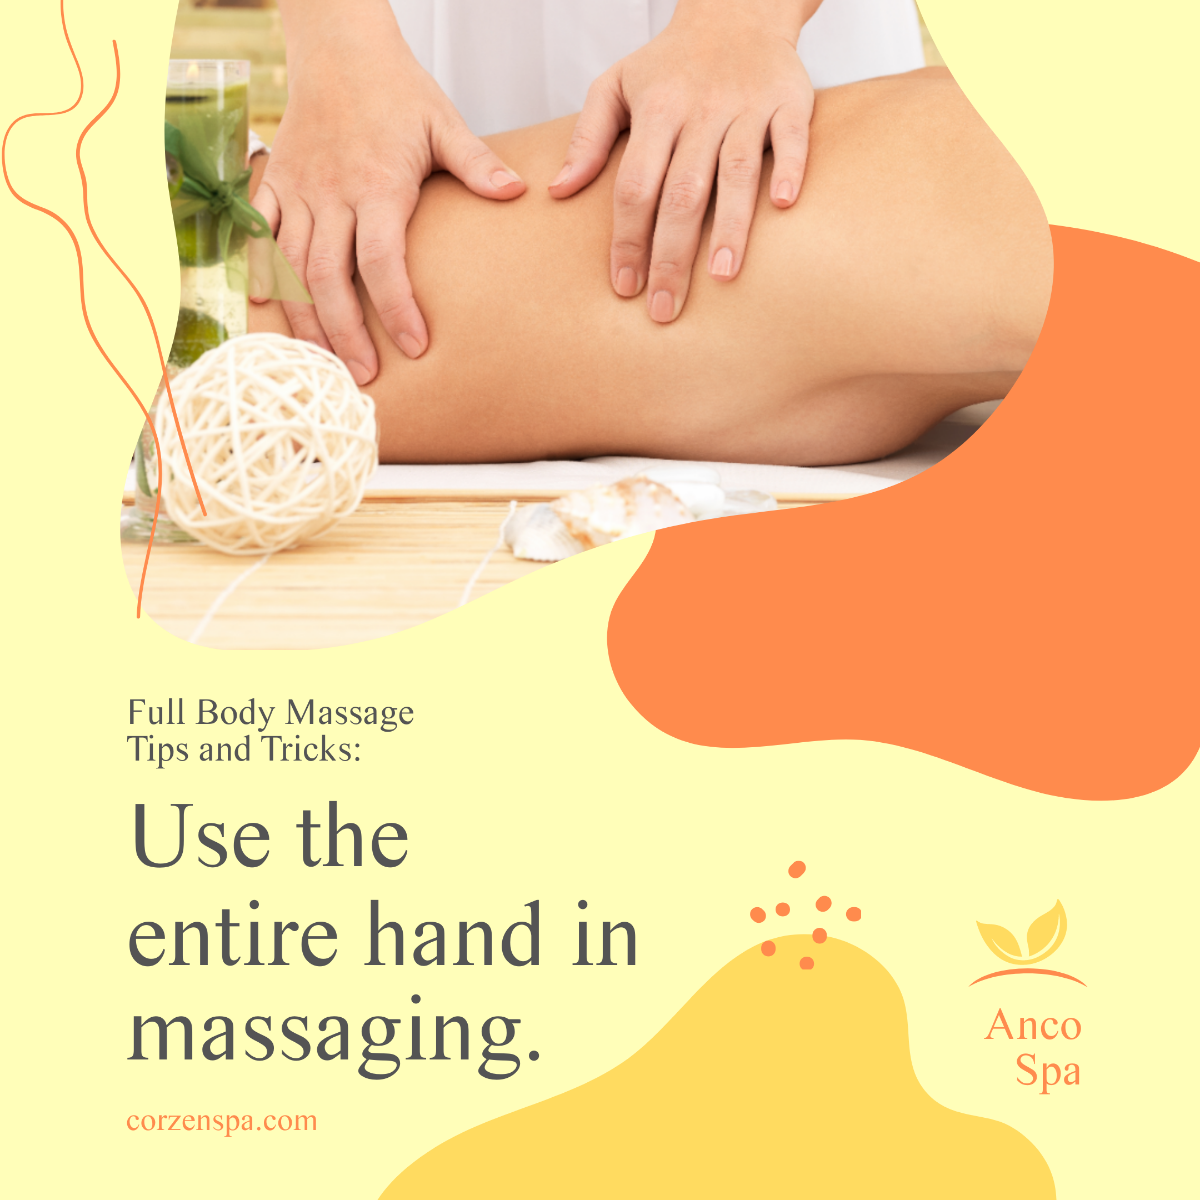 Full Body Massage Tips And Tricks Post, Instagram, Facebook Template